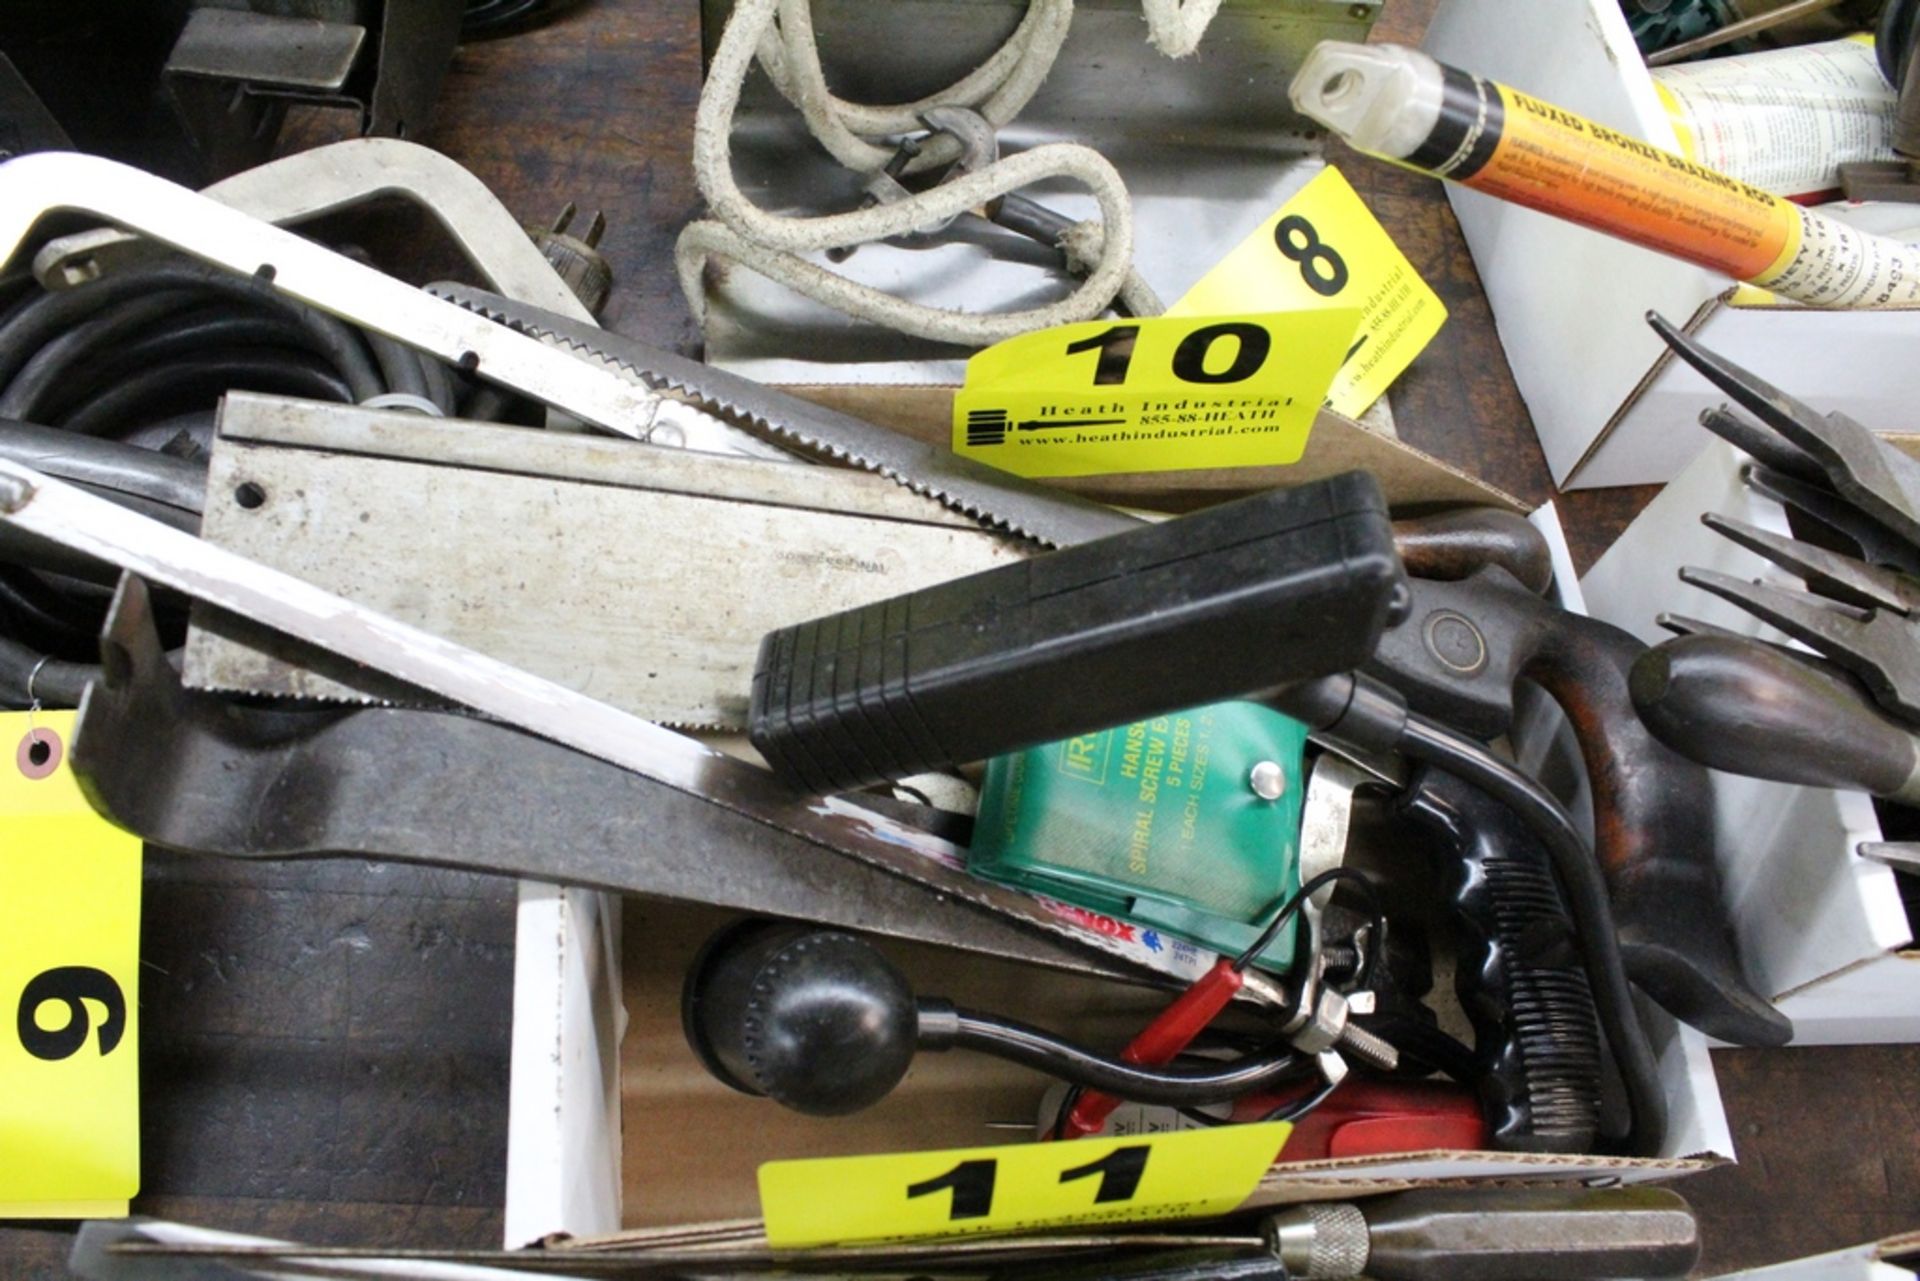 ASSORTED SAWS, PRY BAR, LIGHT, MISC IN BOX